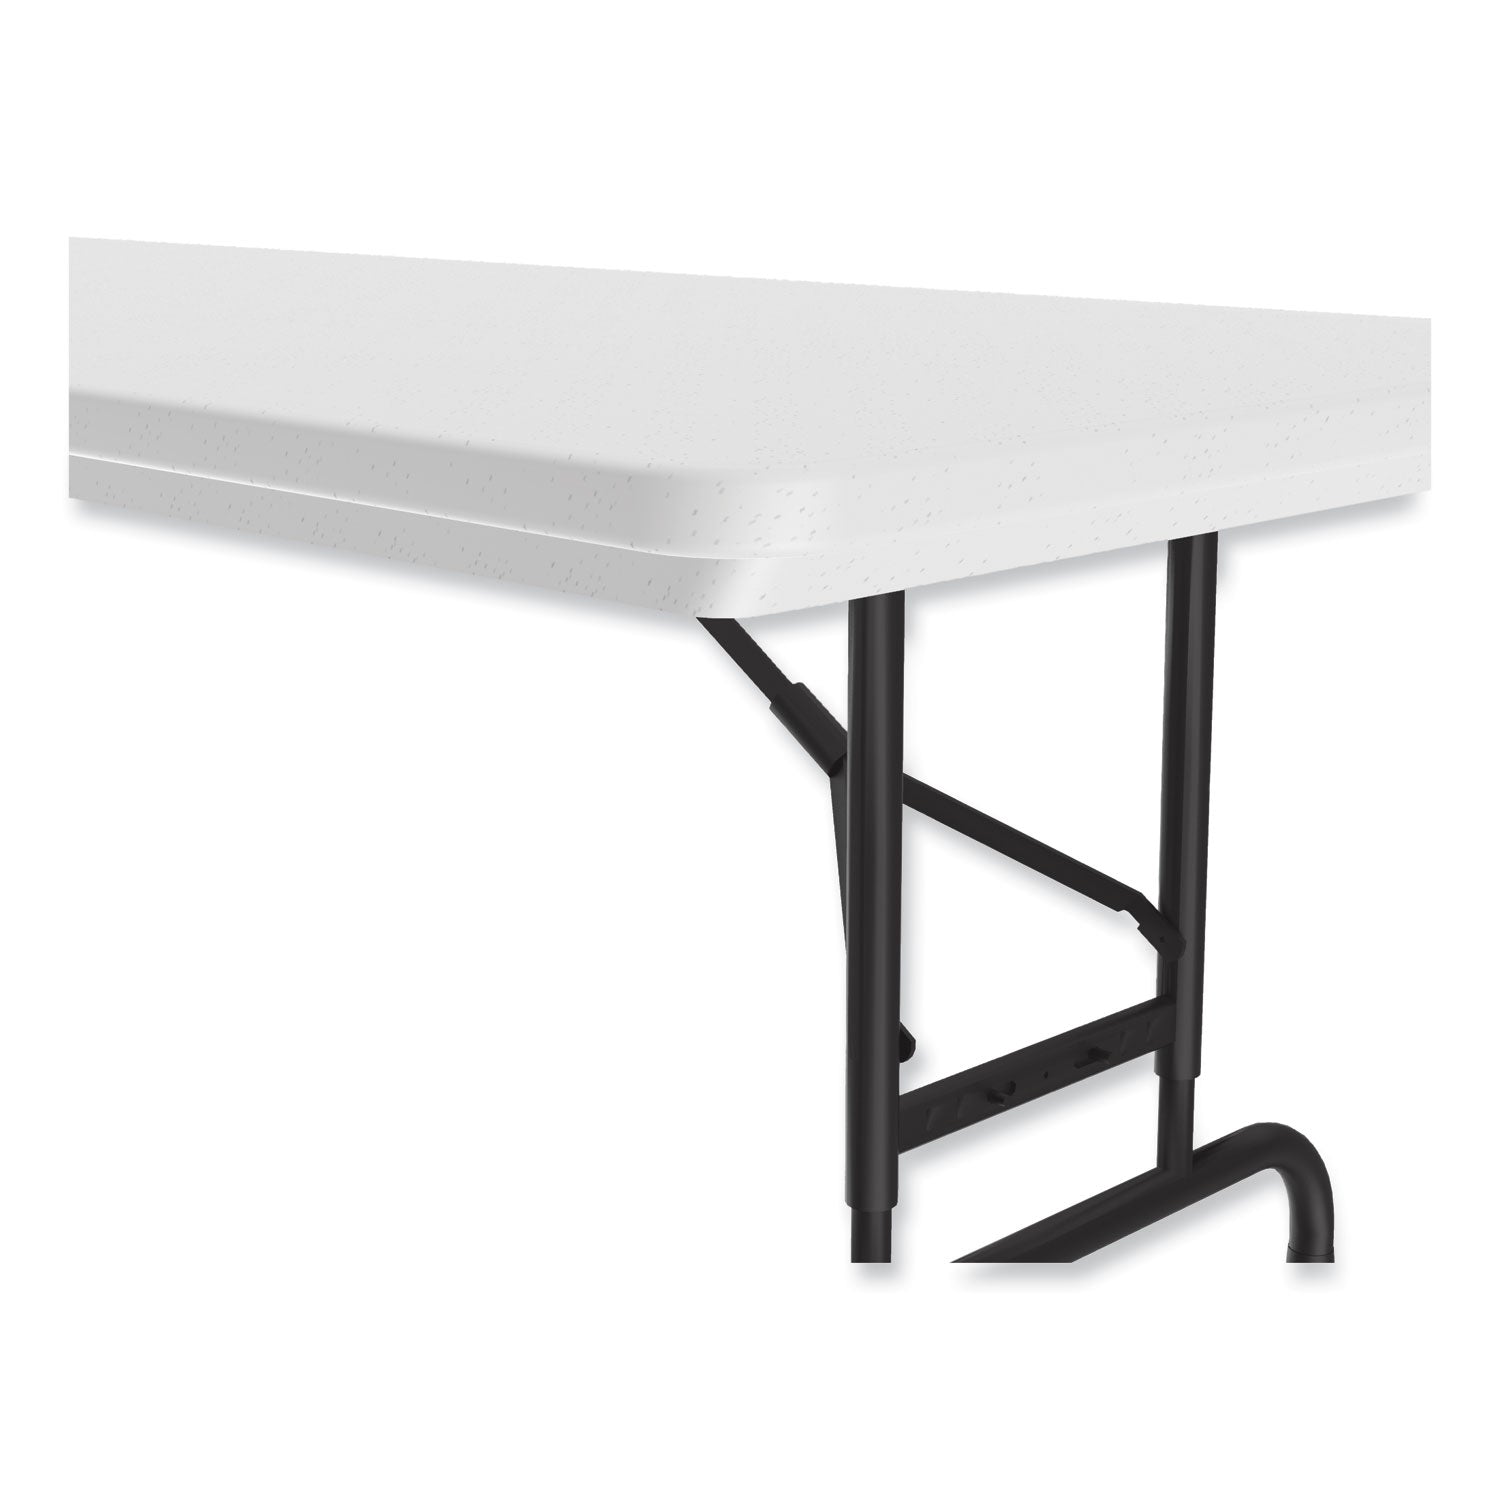 adjustable-folding-tables-rectangular-96-x-30-x-22-to-32-gray-top-black-legs-4-pallet-ships-in-4-6-business-days_crlra3096234p - 4